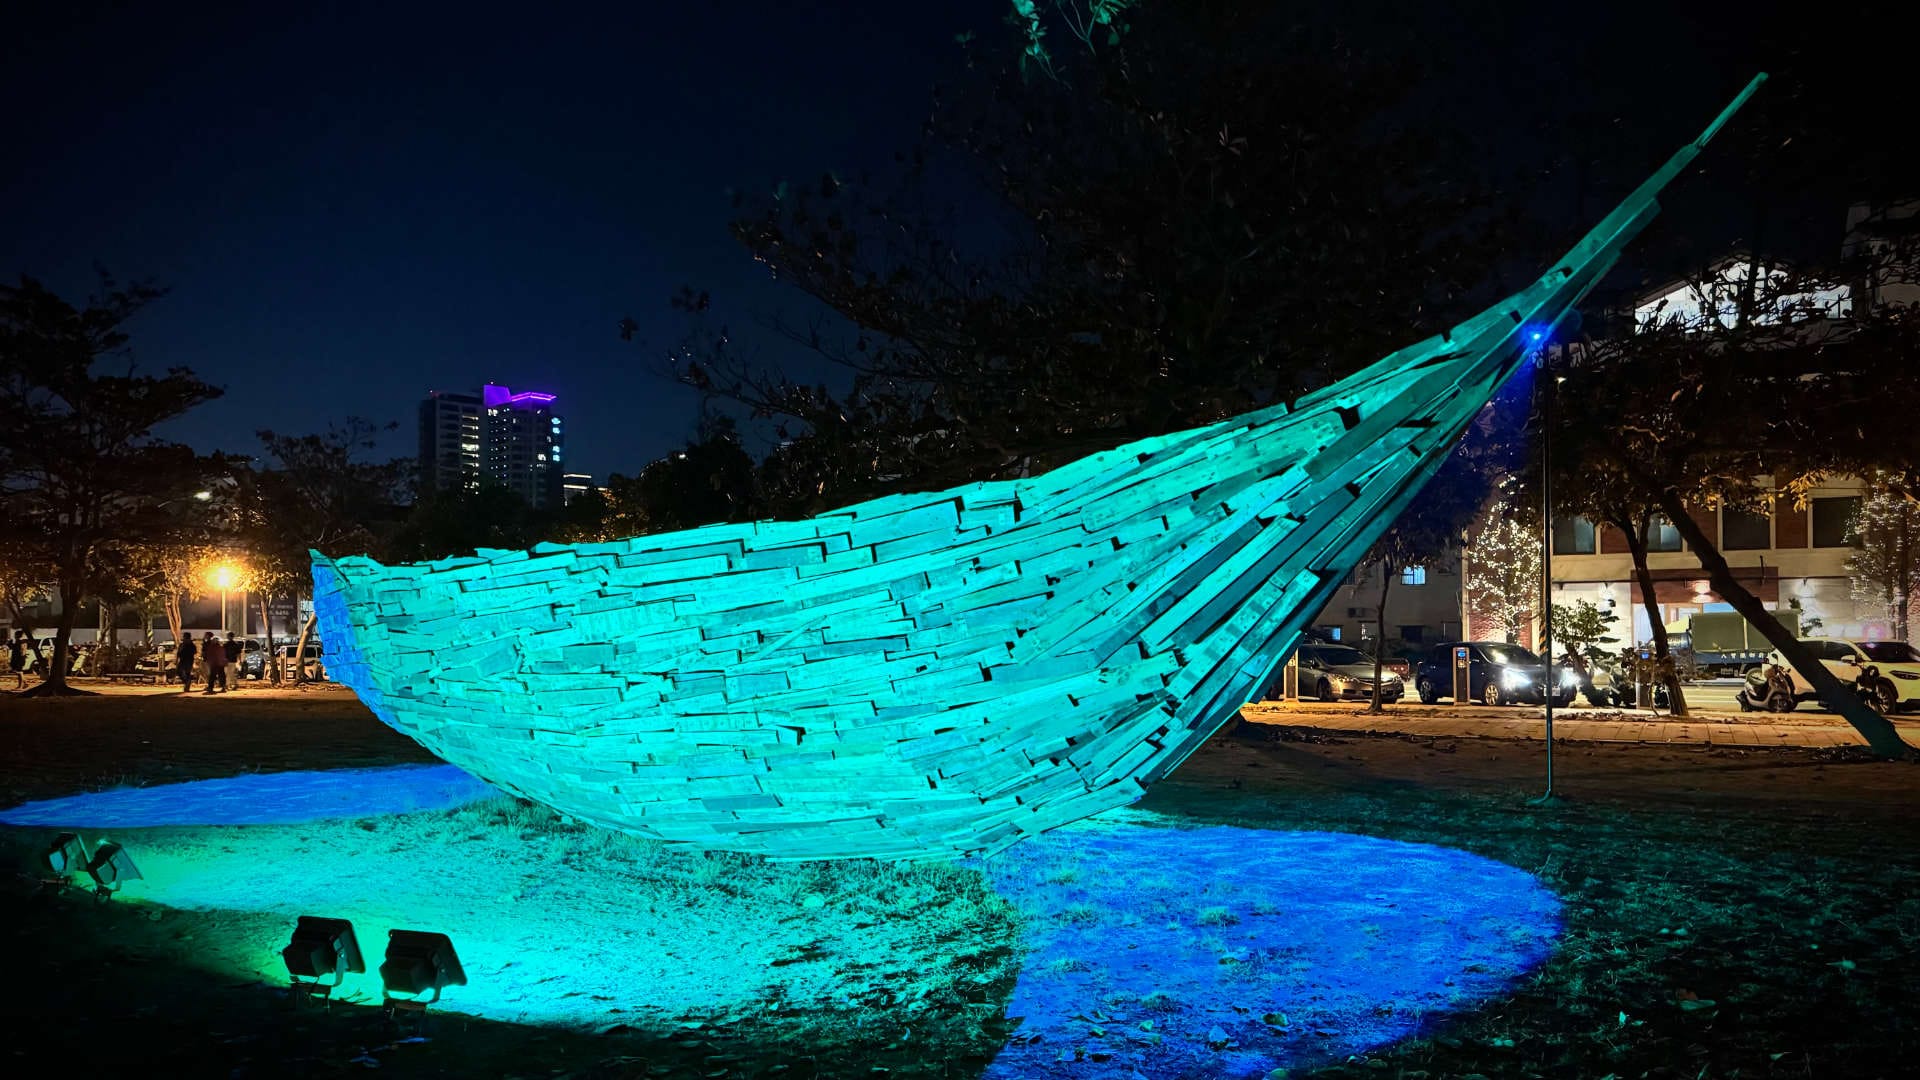 An illuminated sculpture resembling a large wooden boat.